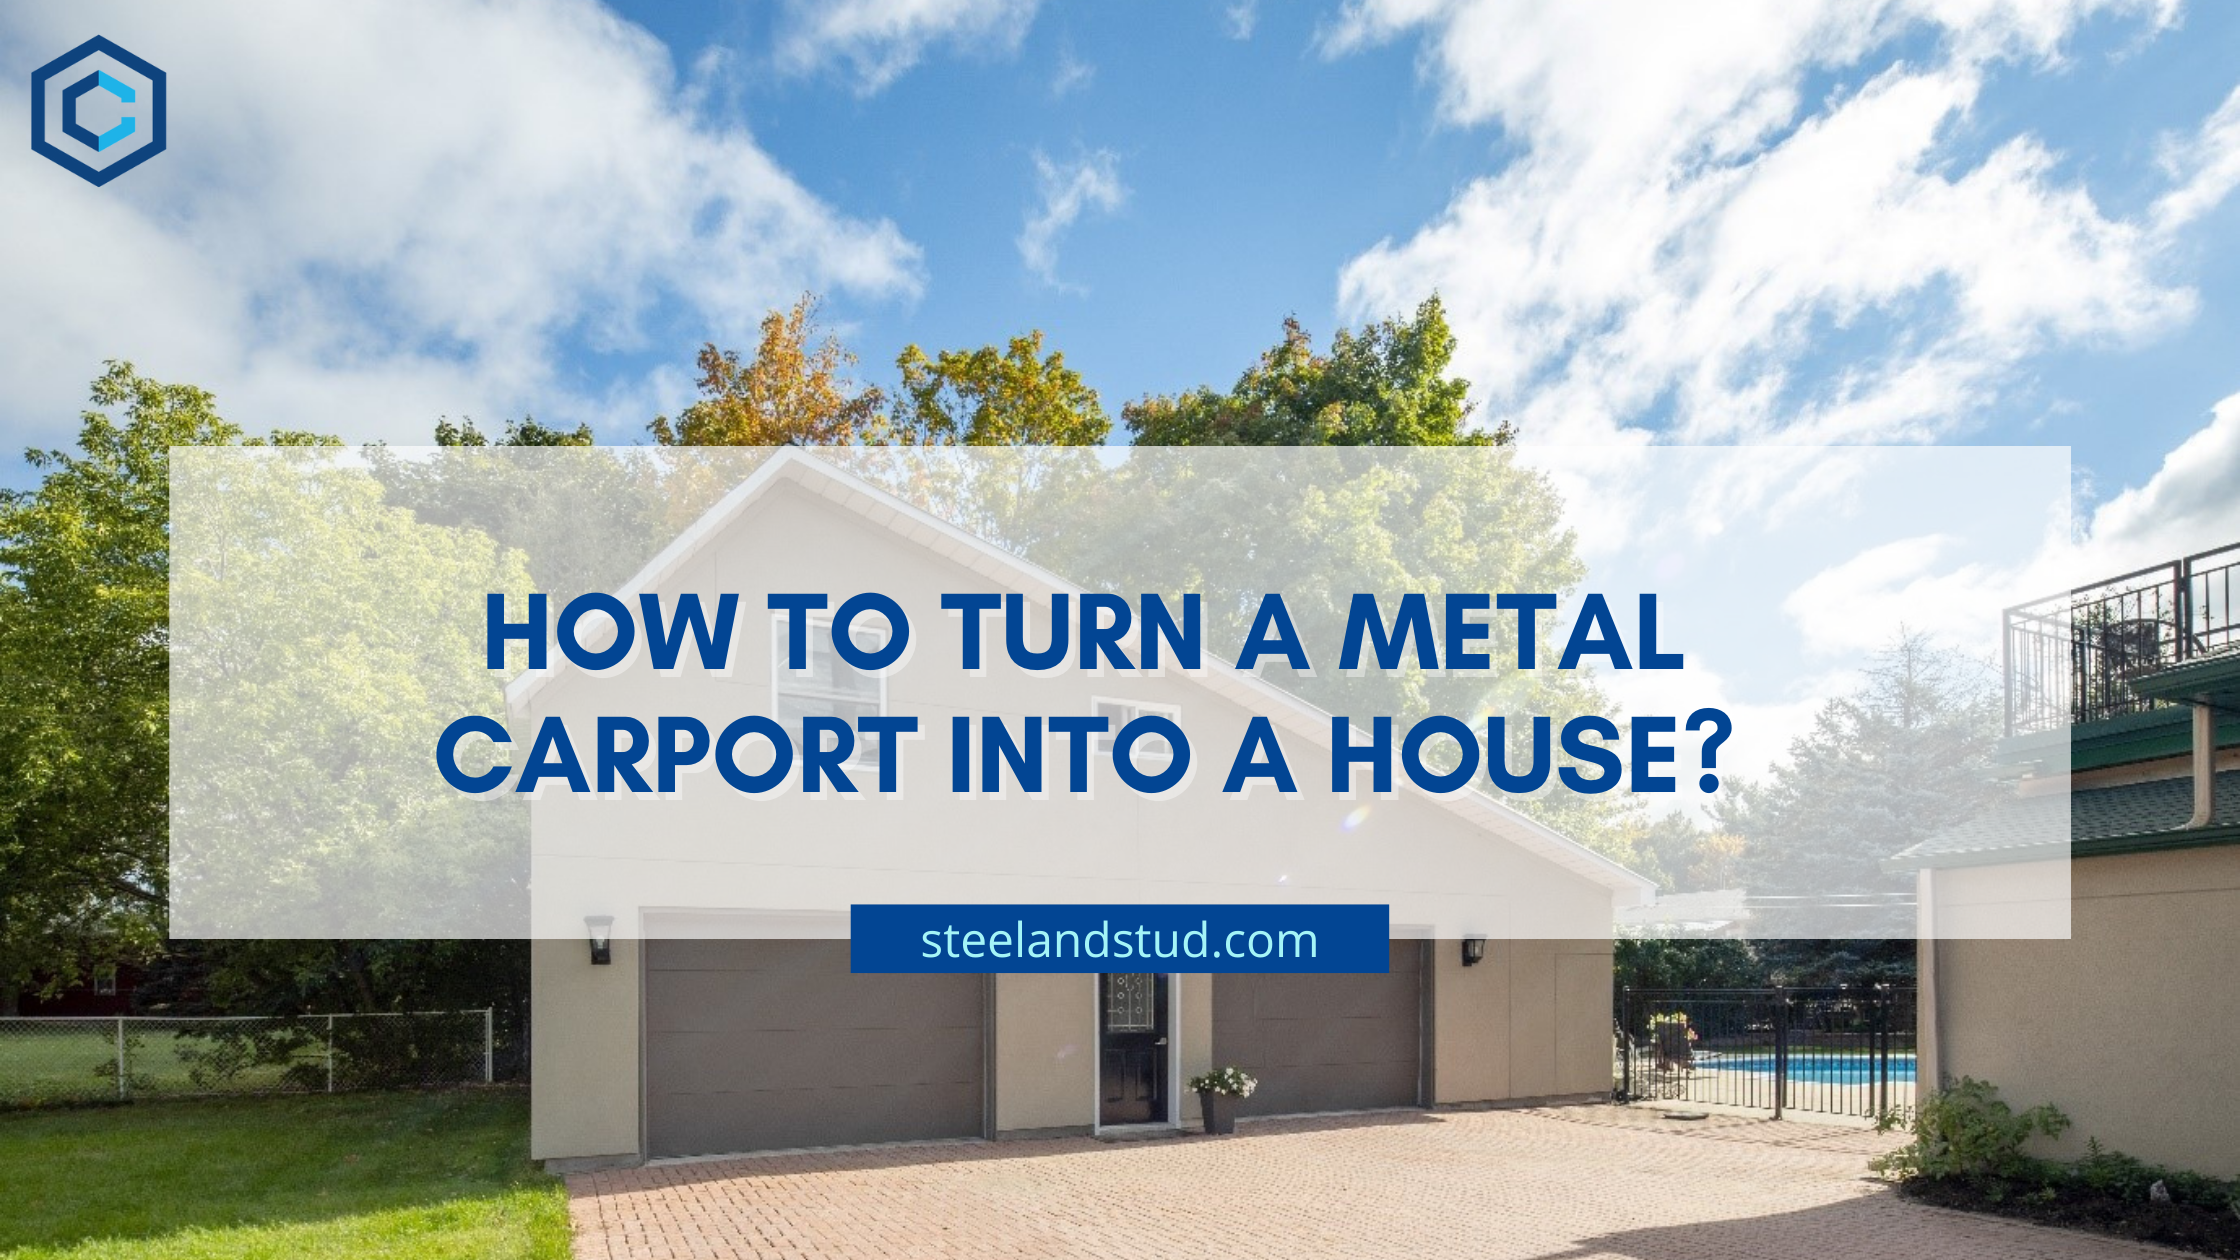 How to Turn A Metal Carport into a House?